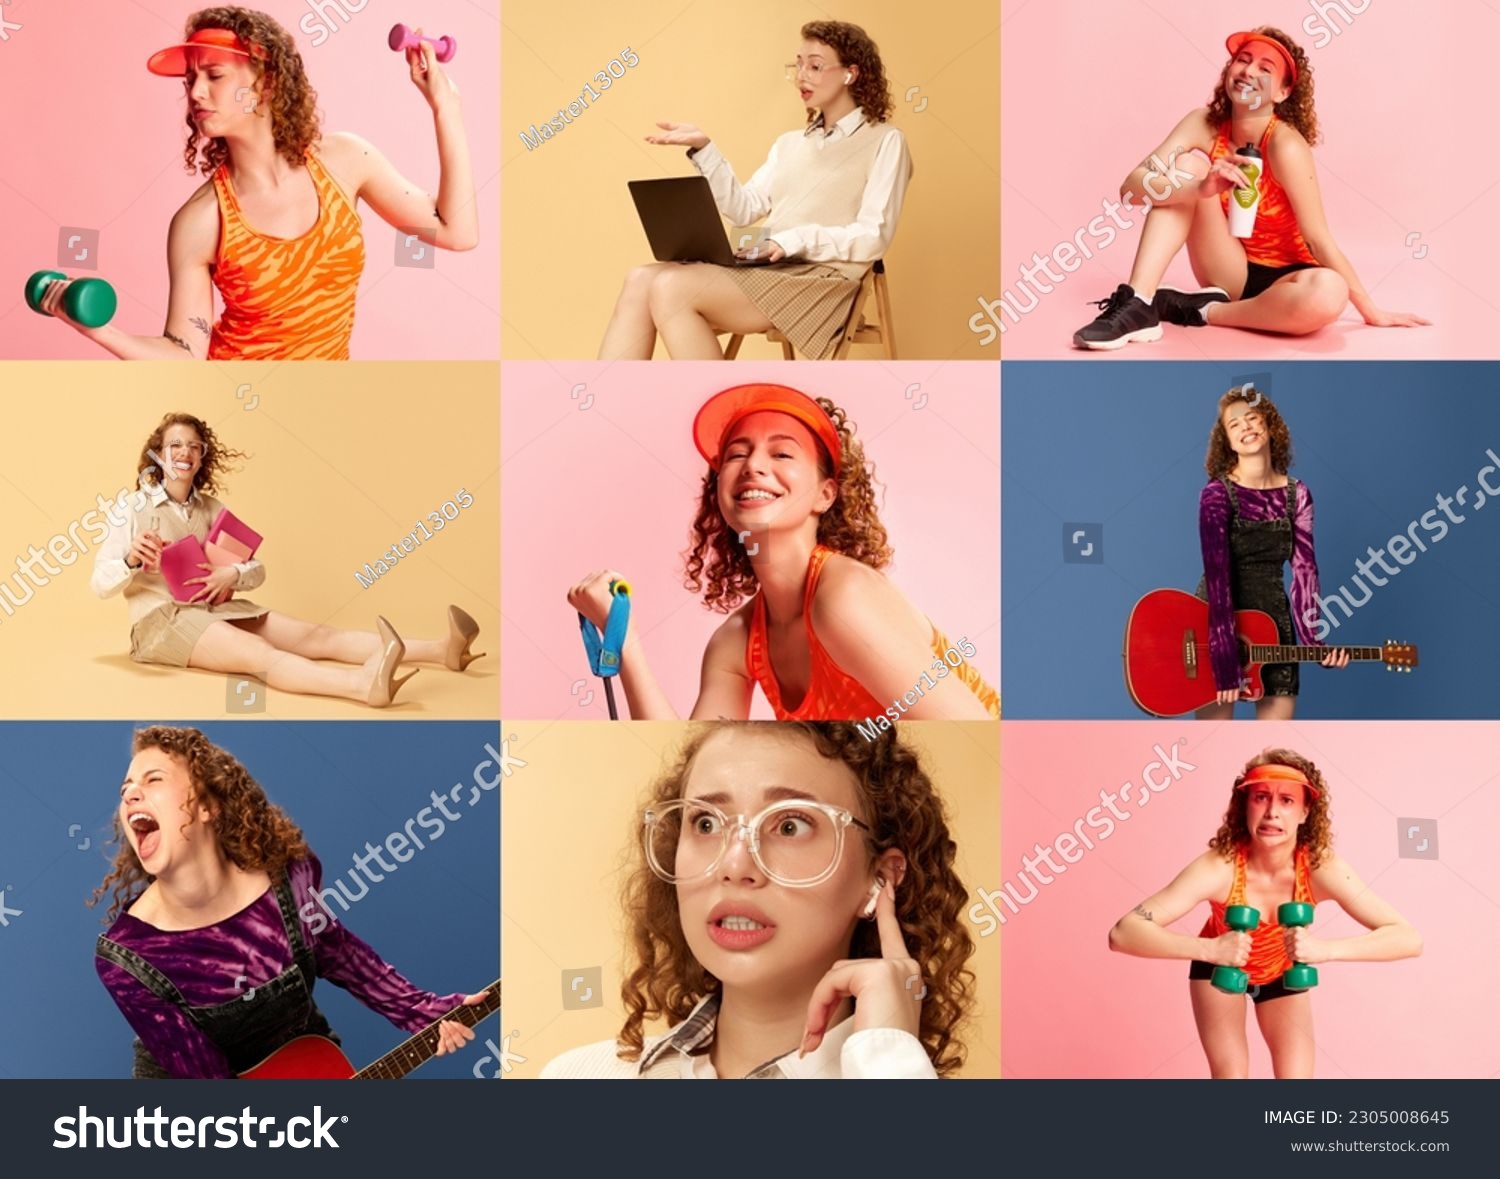 Collage made of portraits of beautiful emotional girl posing in different clothes and life situations over multicolor background. Concept of human emotions, youth culture, creative lifestyle #2305008645